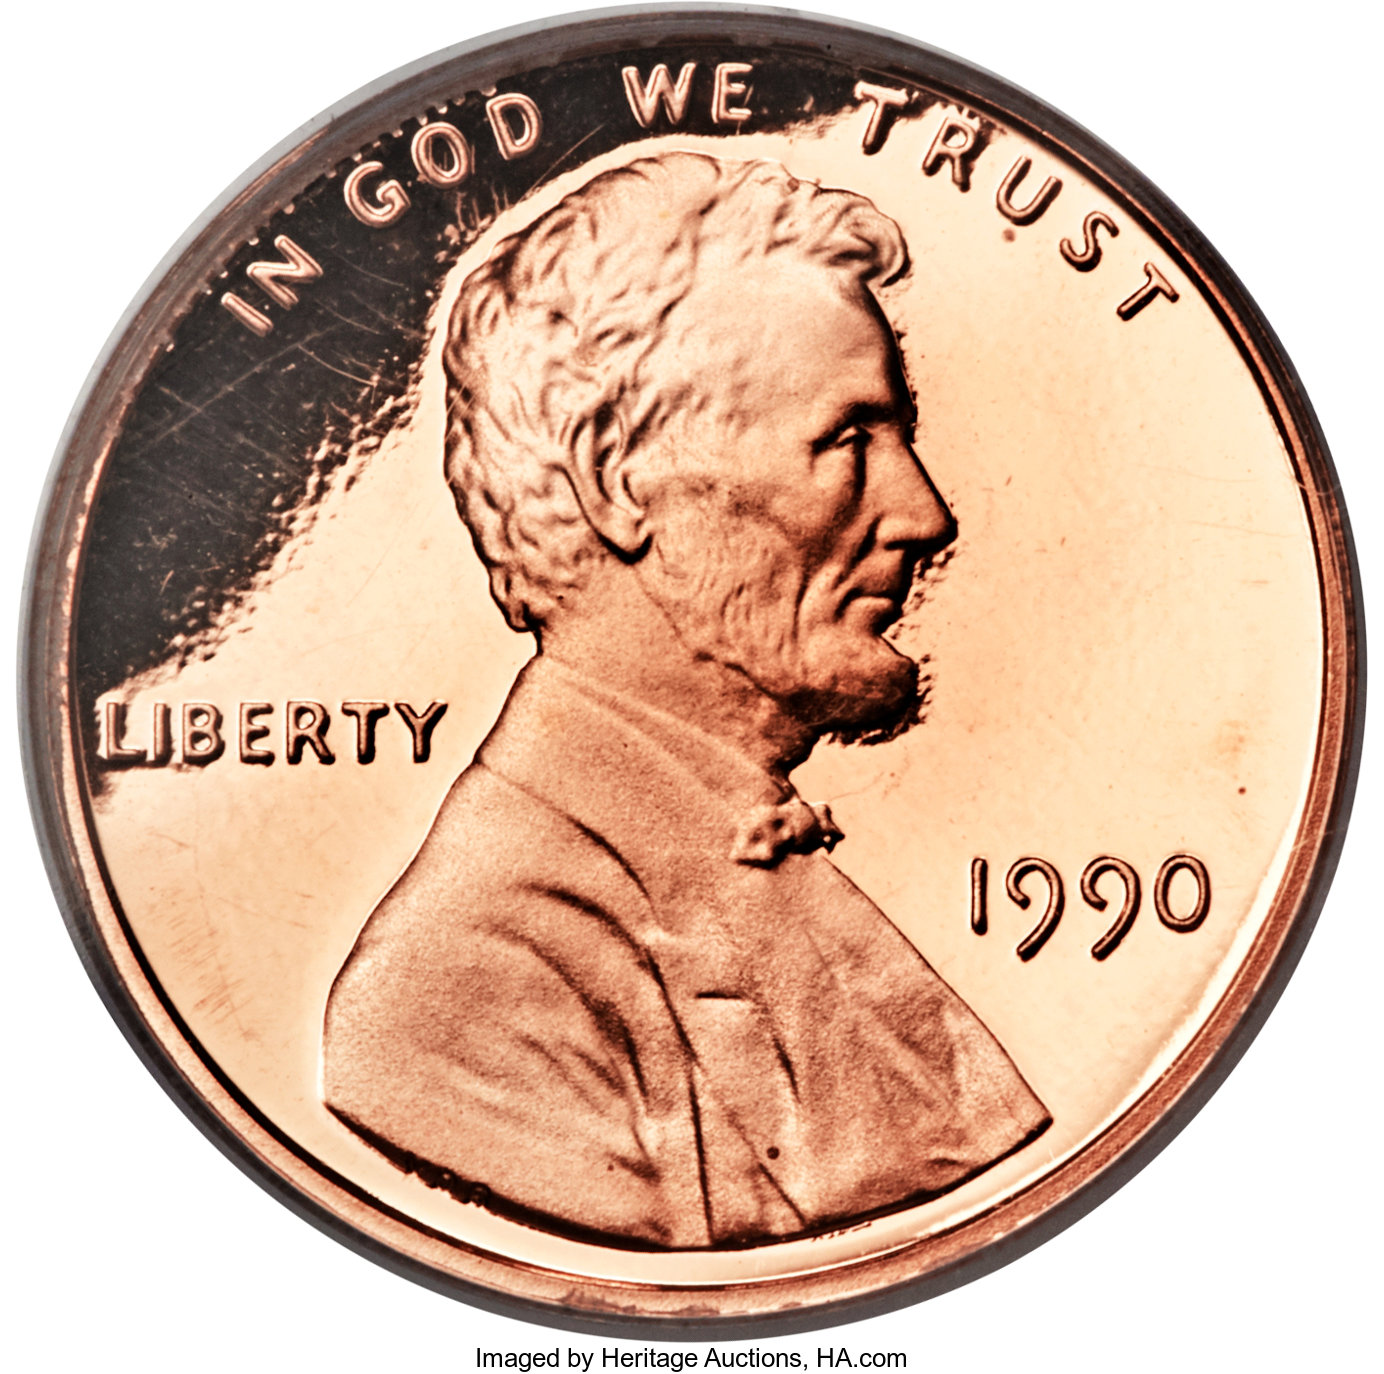 enlarged image for 13 Lincoln Memorial Cent Varieties Add Challenge, Flair To Popular Series